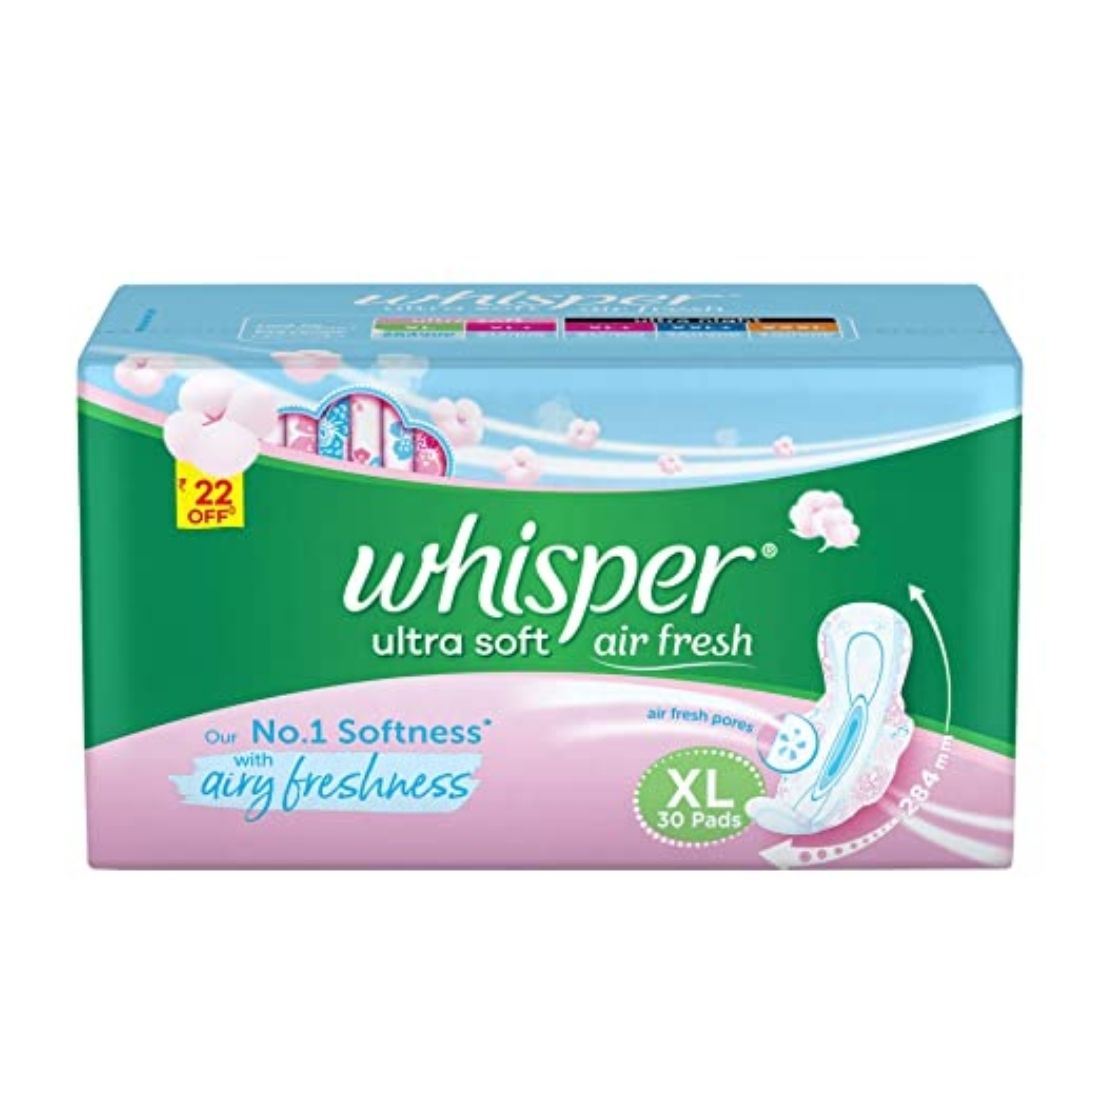 Buy Whisper Ultra Soft Sanitary Napkins which has stretchable wings ensure that the liquid gets to the core and locks it for a comfortable, dry feel